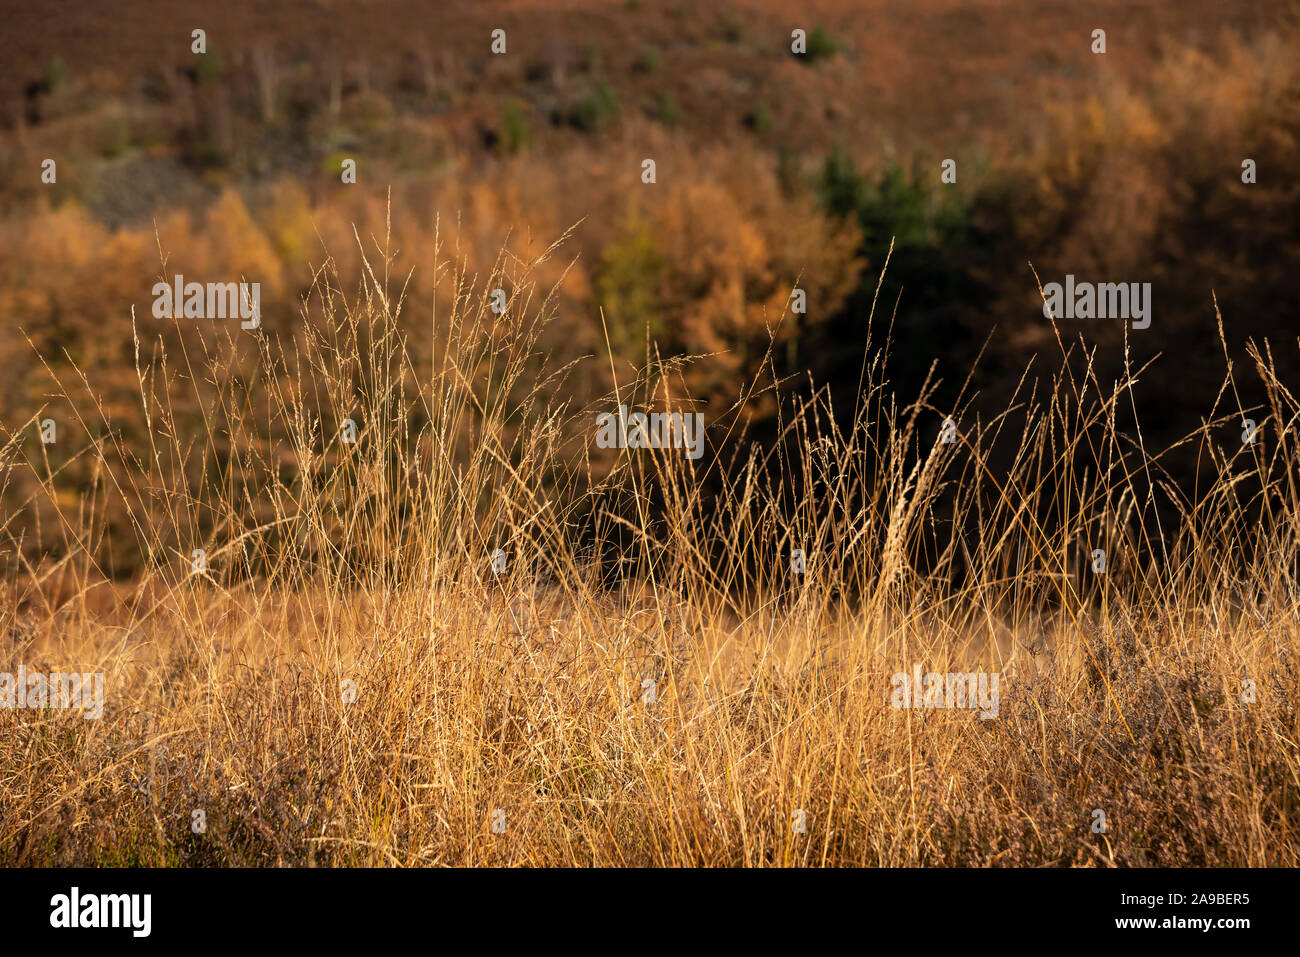 Moorland grasses with fine texture in autumn sunshine. Derbyshire, England. Stock Photo